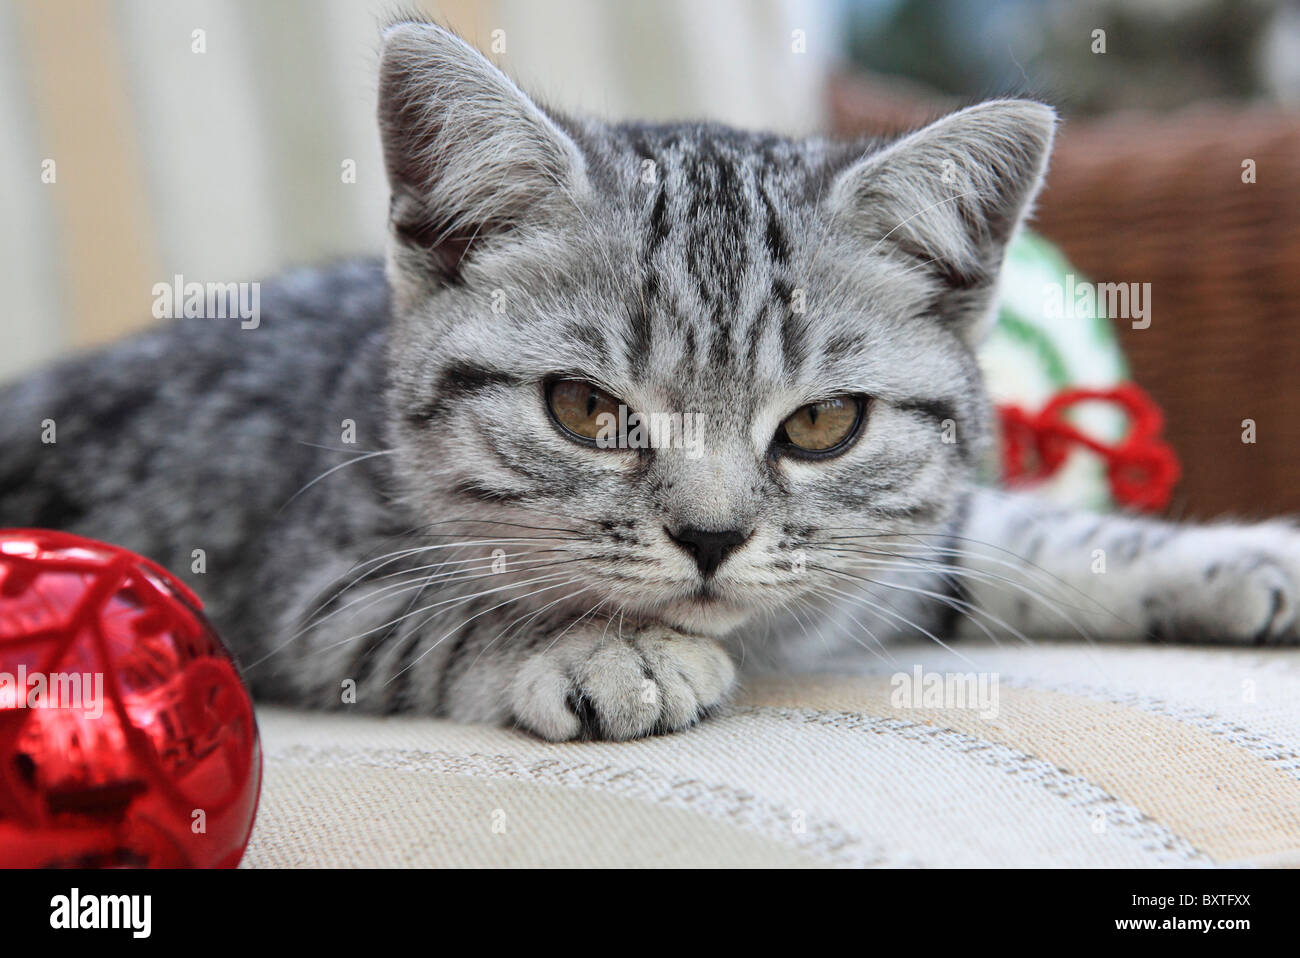 British Shorthair, Silver Spotted Kitten, 3 Months Old Stock Photo